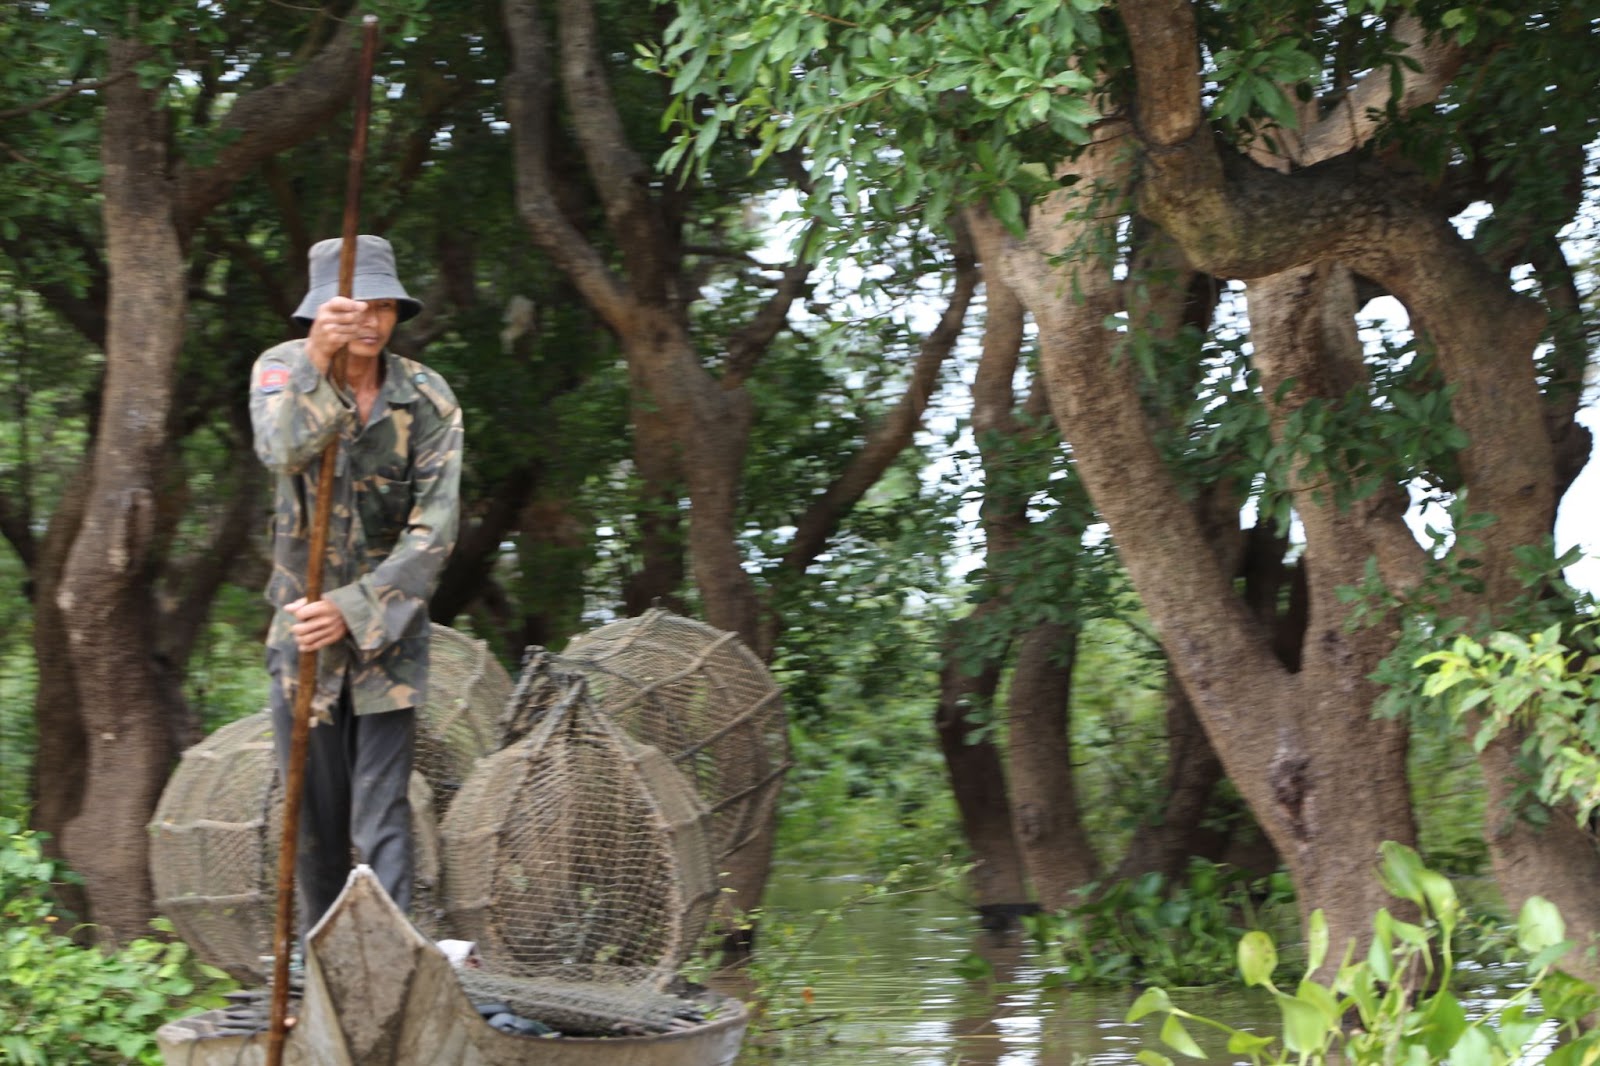 This is a fisherman wading through the flooded forests of Tonle Sap.